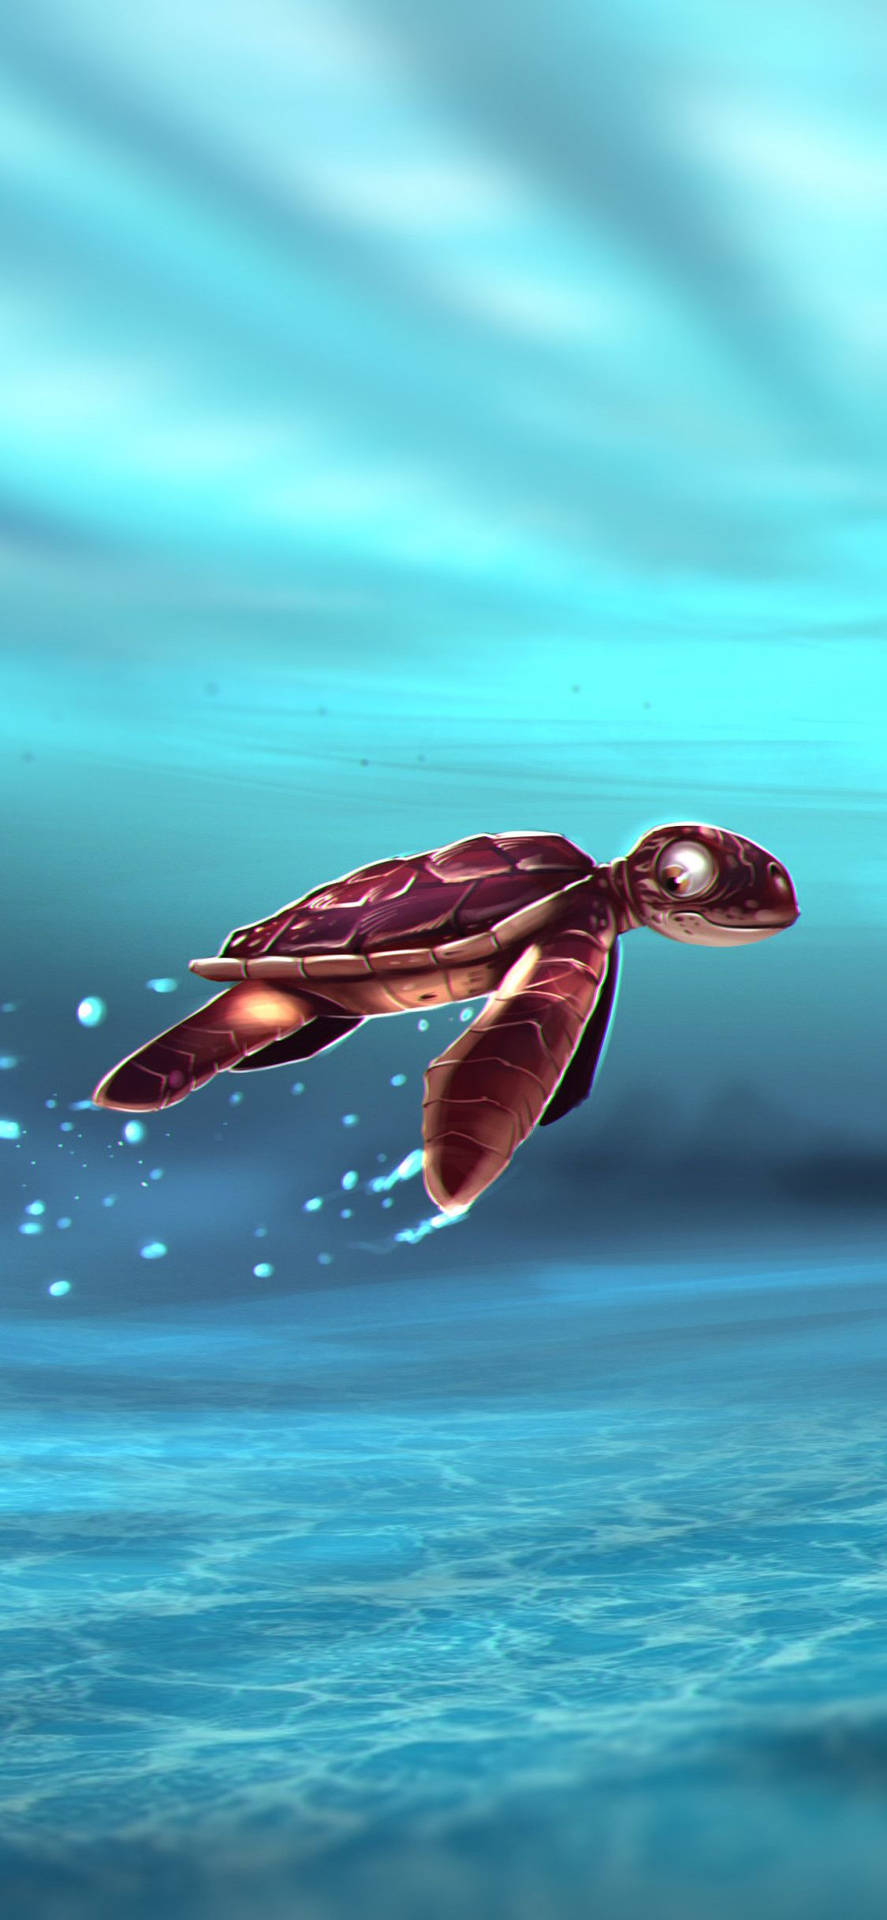 Get a closer look of a sea turtle underwater. Wallpaper